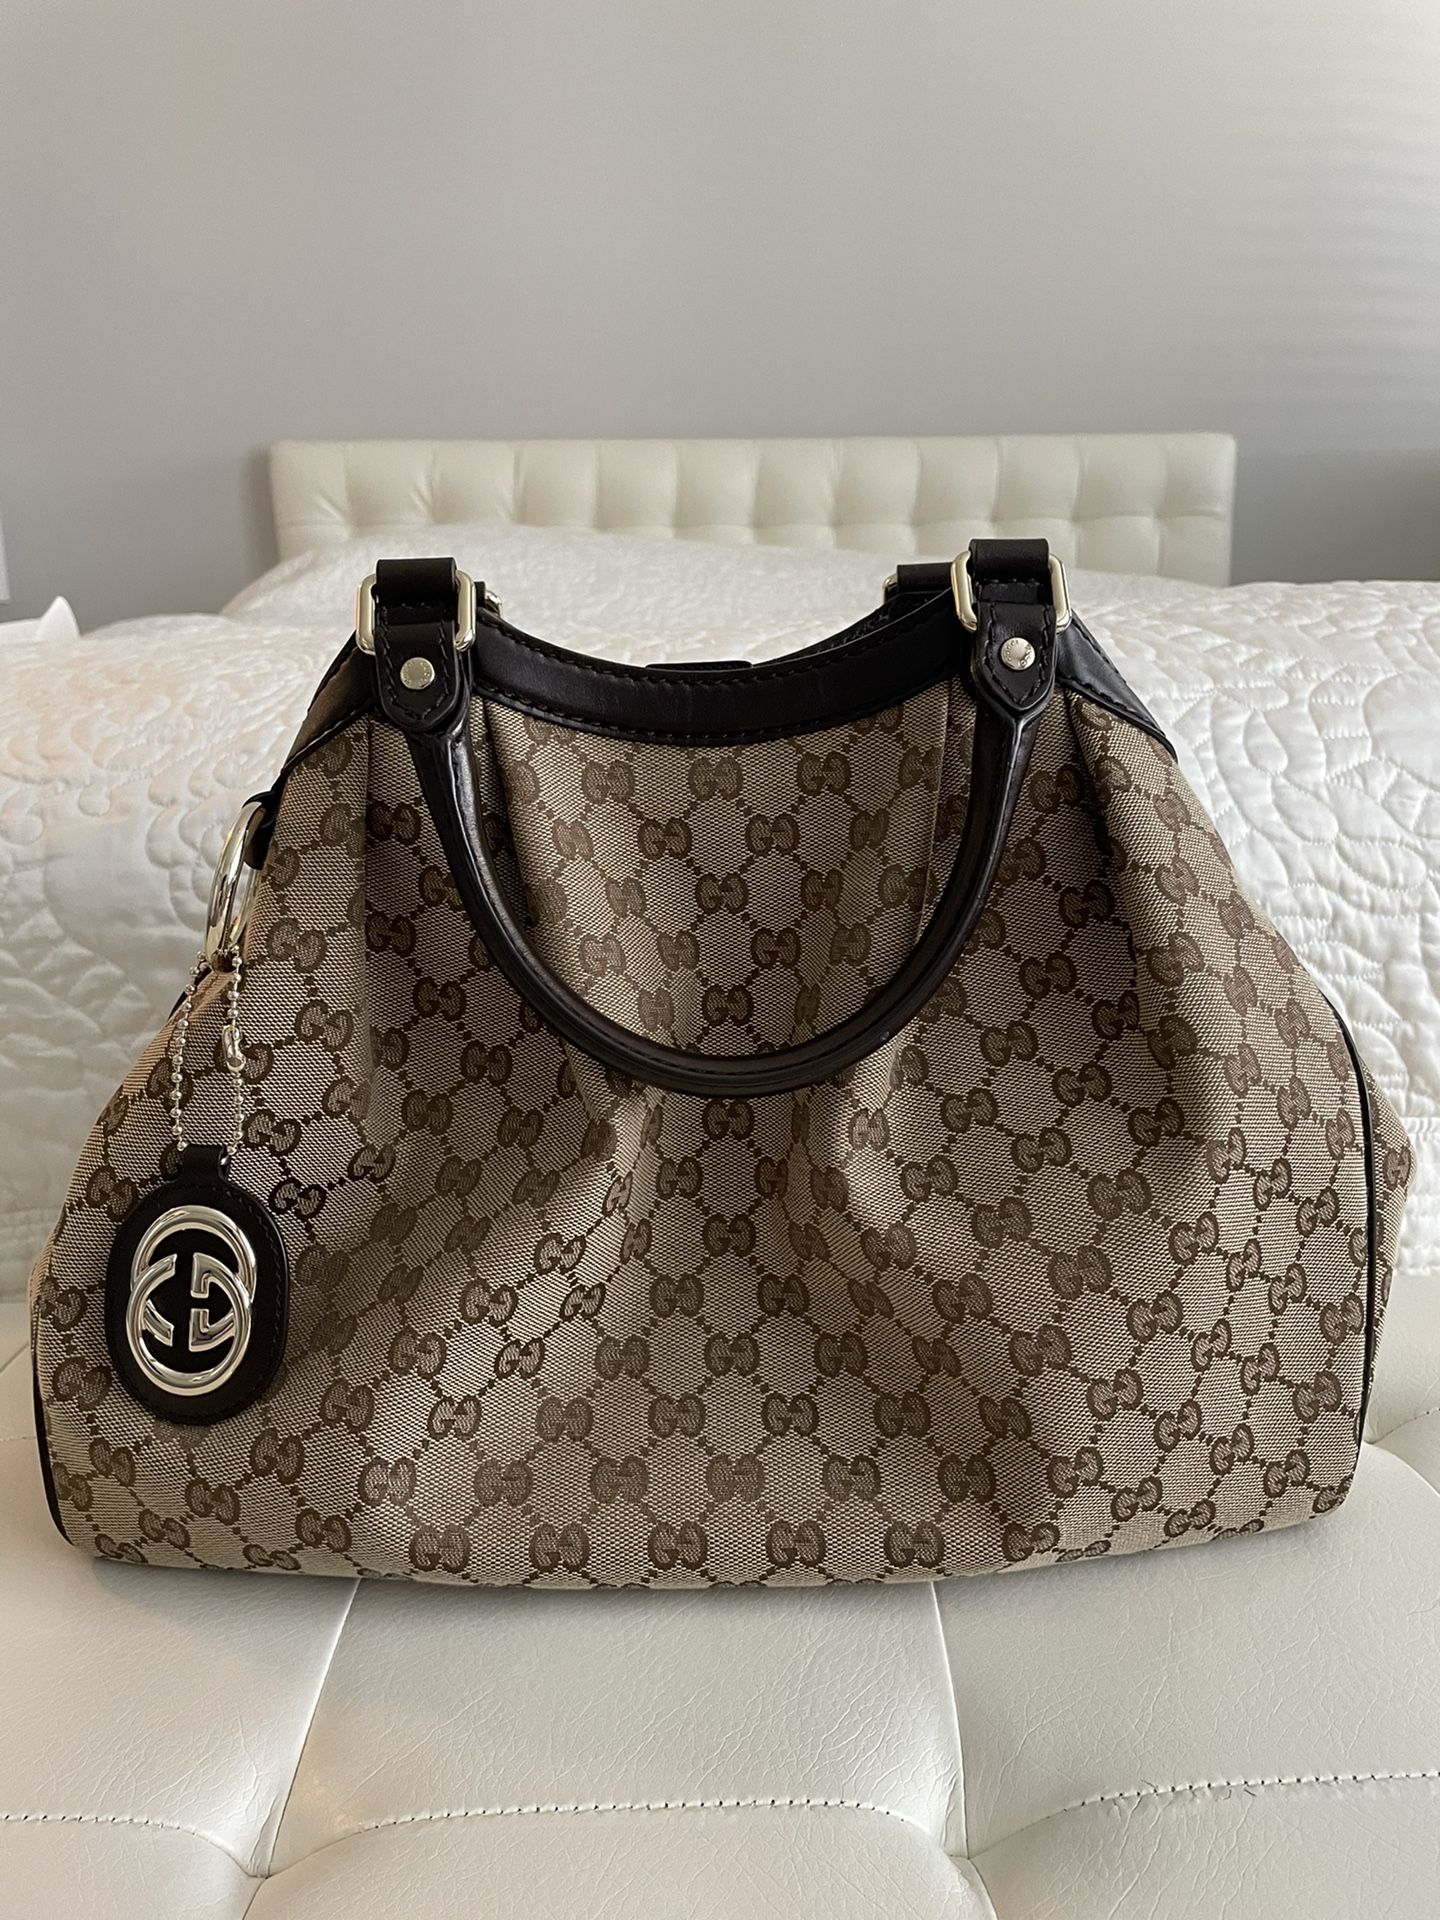 100% Authentic Gucci Tote - Like New